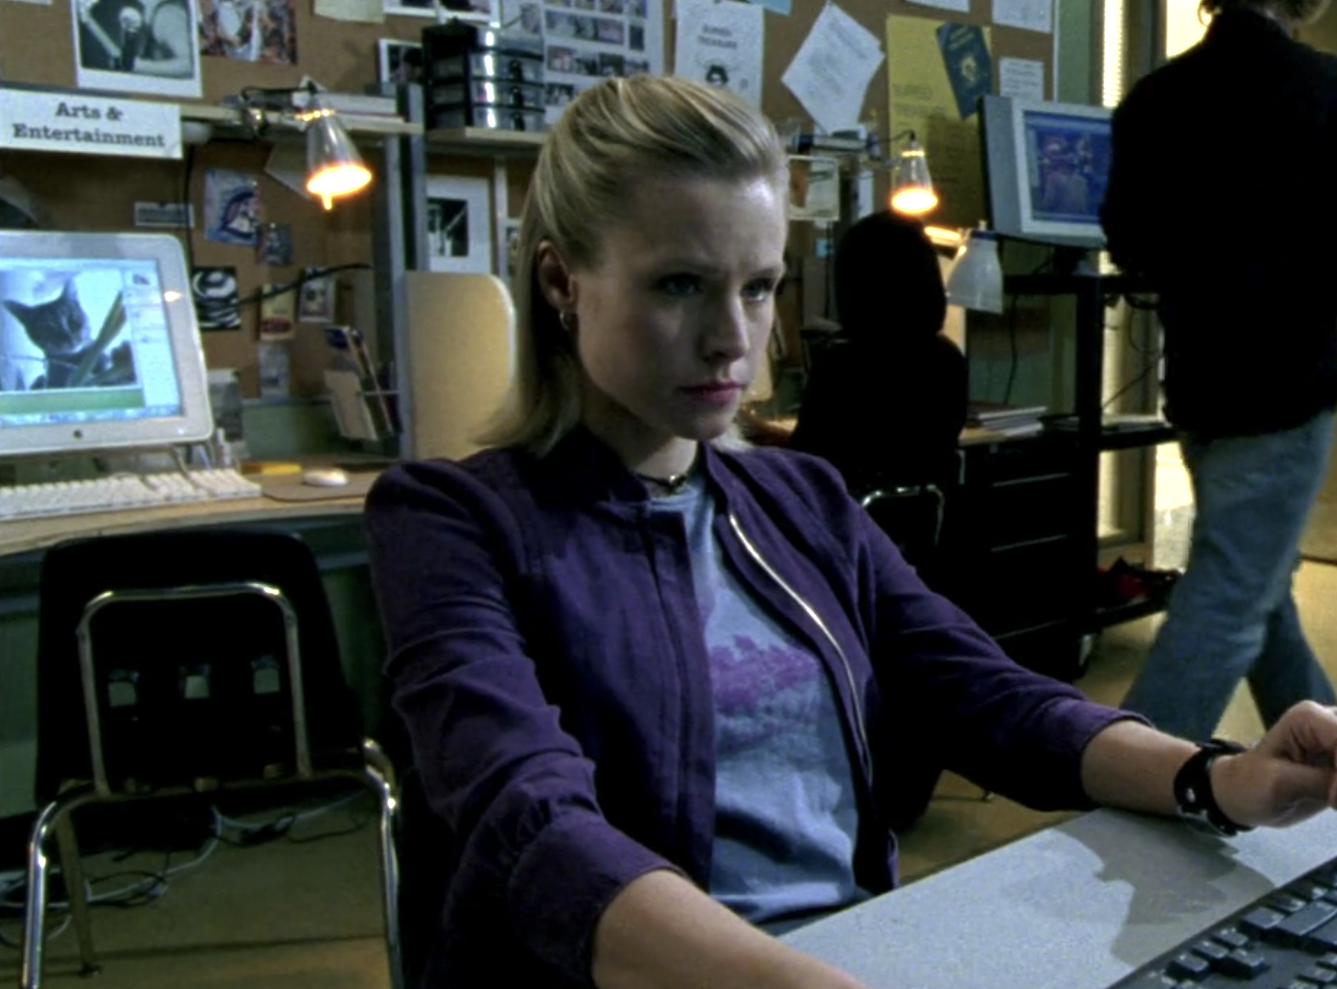 Screenshot from S1E7 of Veronica Mars. Veronica is sitting in a classroom at a computer. She is wearing a purple jacket. On a computer behind her is an imagine of a cat.